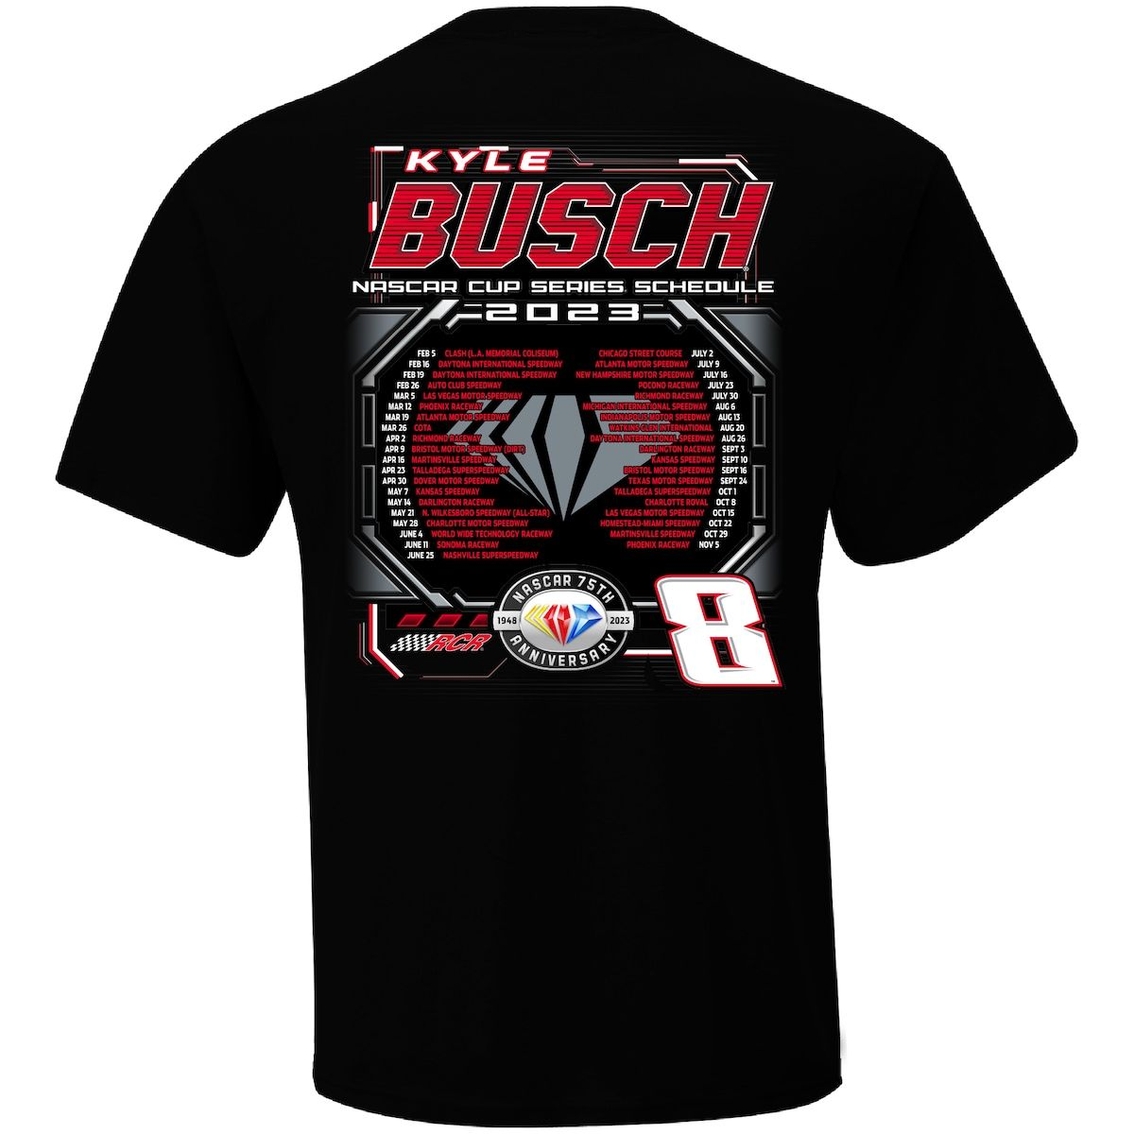 Richard Childress Racing Team Collection Men's Richard Childress Racing Team Collection Black Kyle Busch 2023 NASCAR Cup Series Schedule T-Shirt - Image 4 of 4